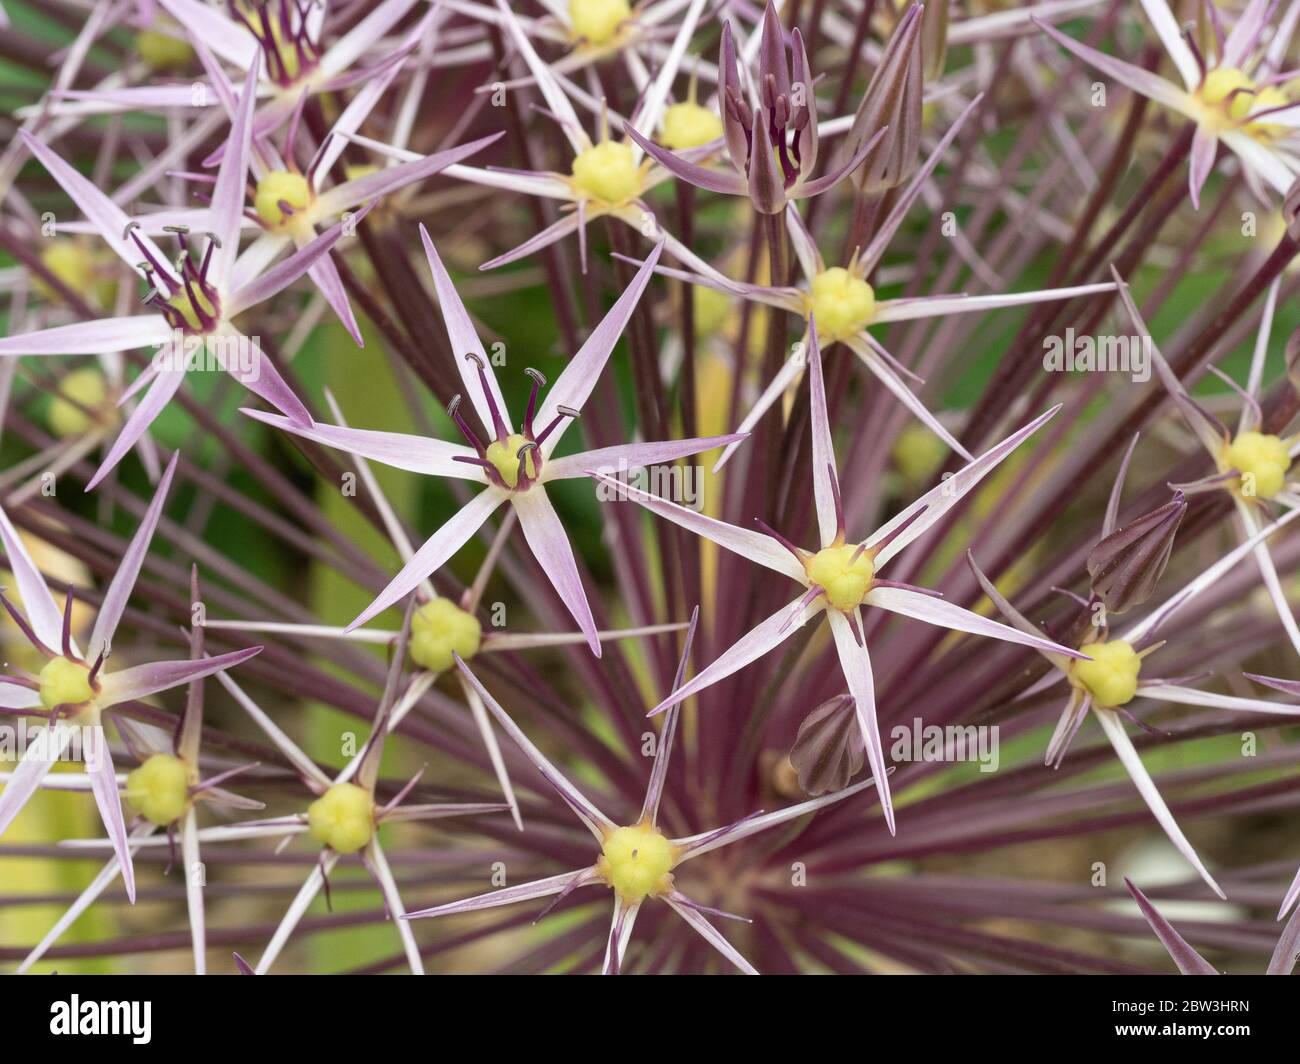 A close up of the lilac star like flowers of Allium christophii Stock Photo